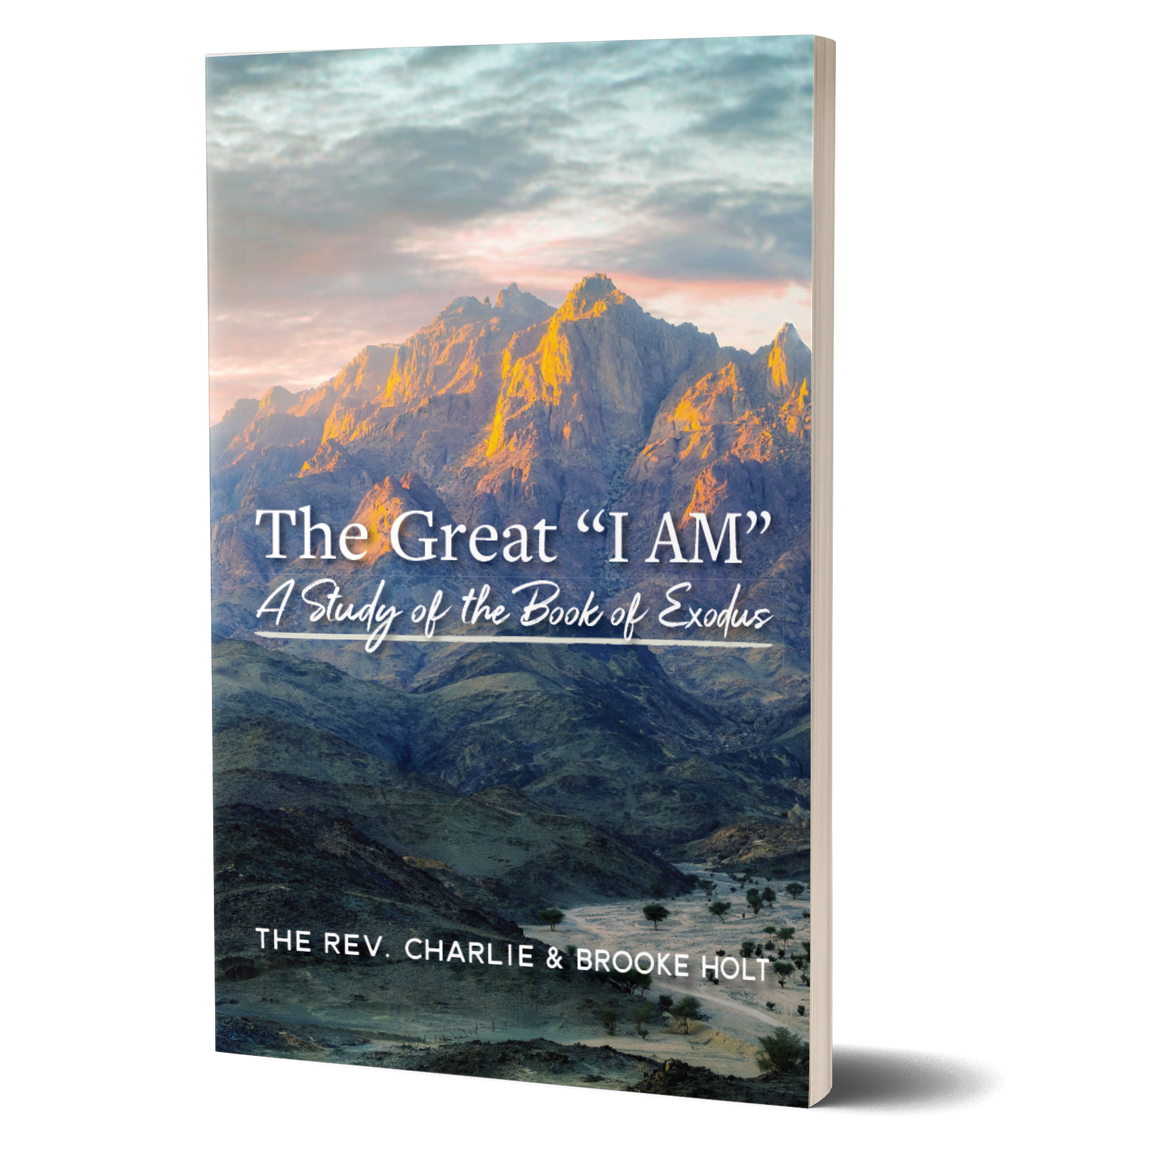 The Great "I AM" – A Study of the Book of Exodus